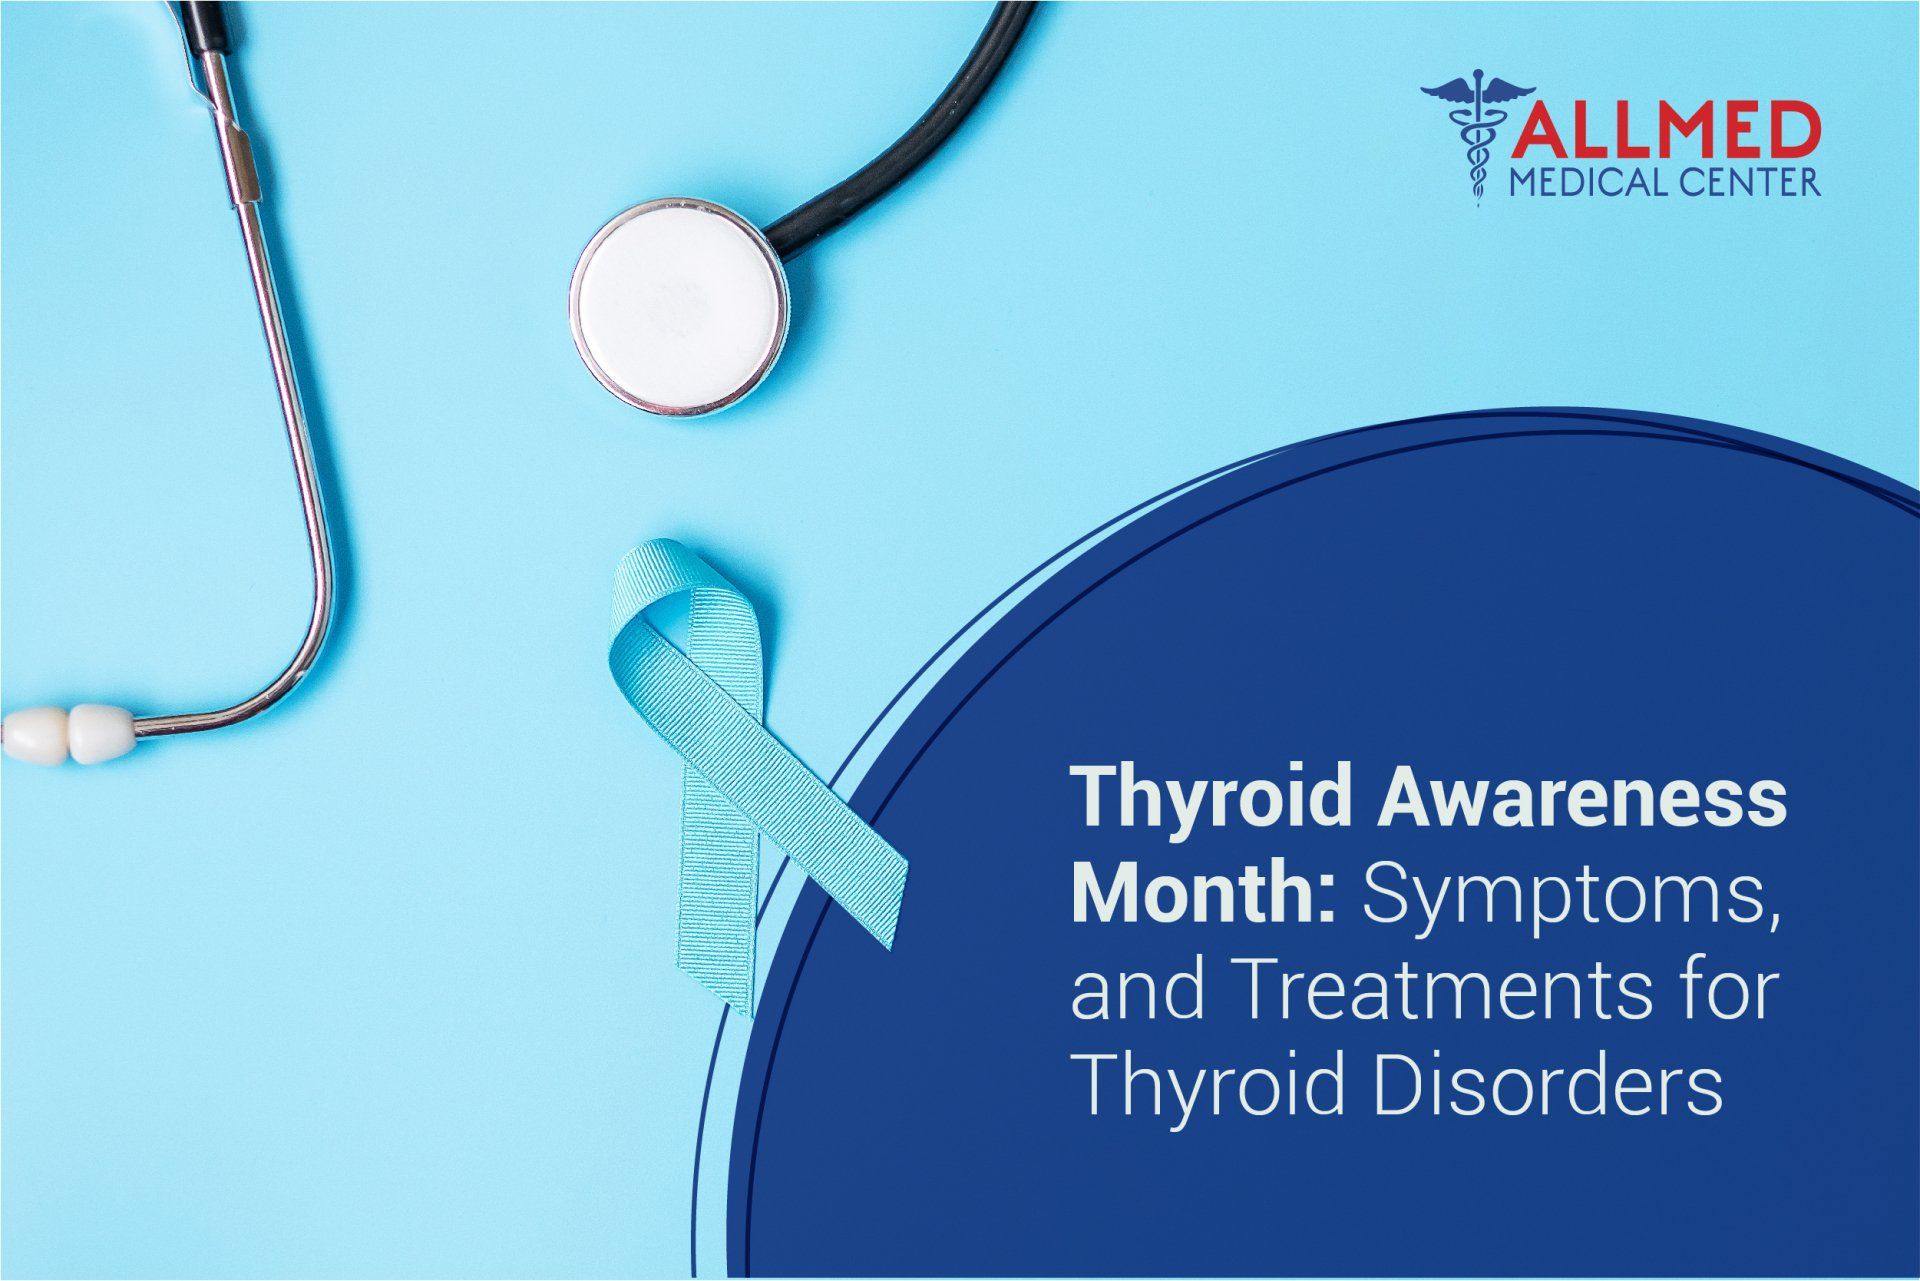 Thyroid Awareness Symptoms and Treatments for Thyroid Disorders